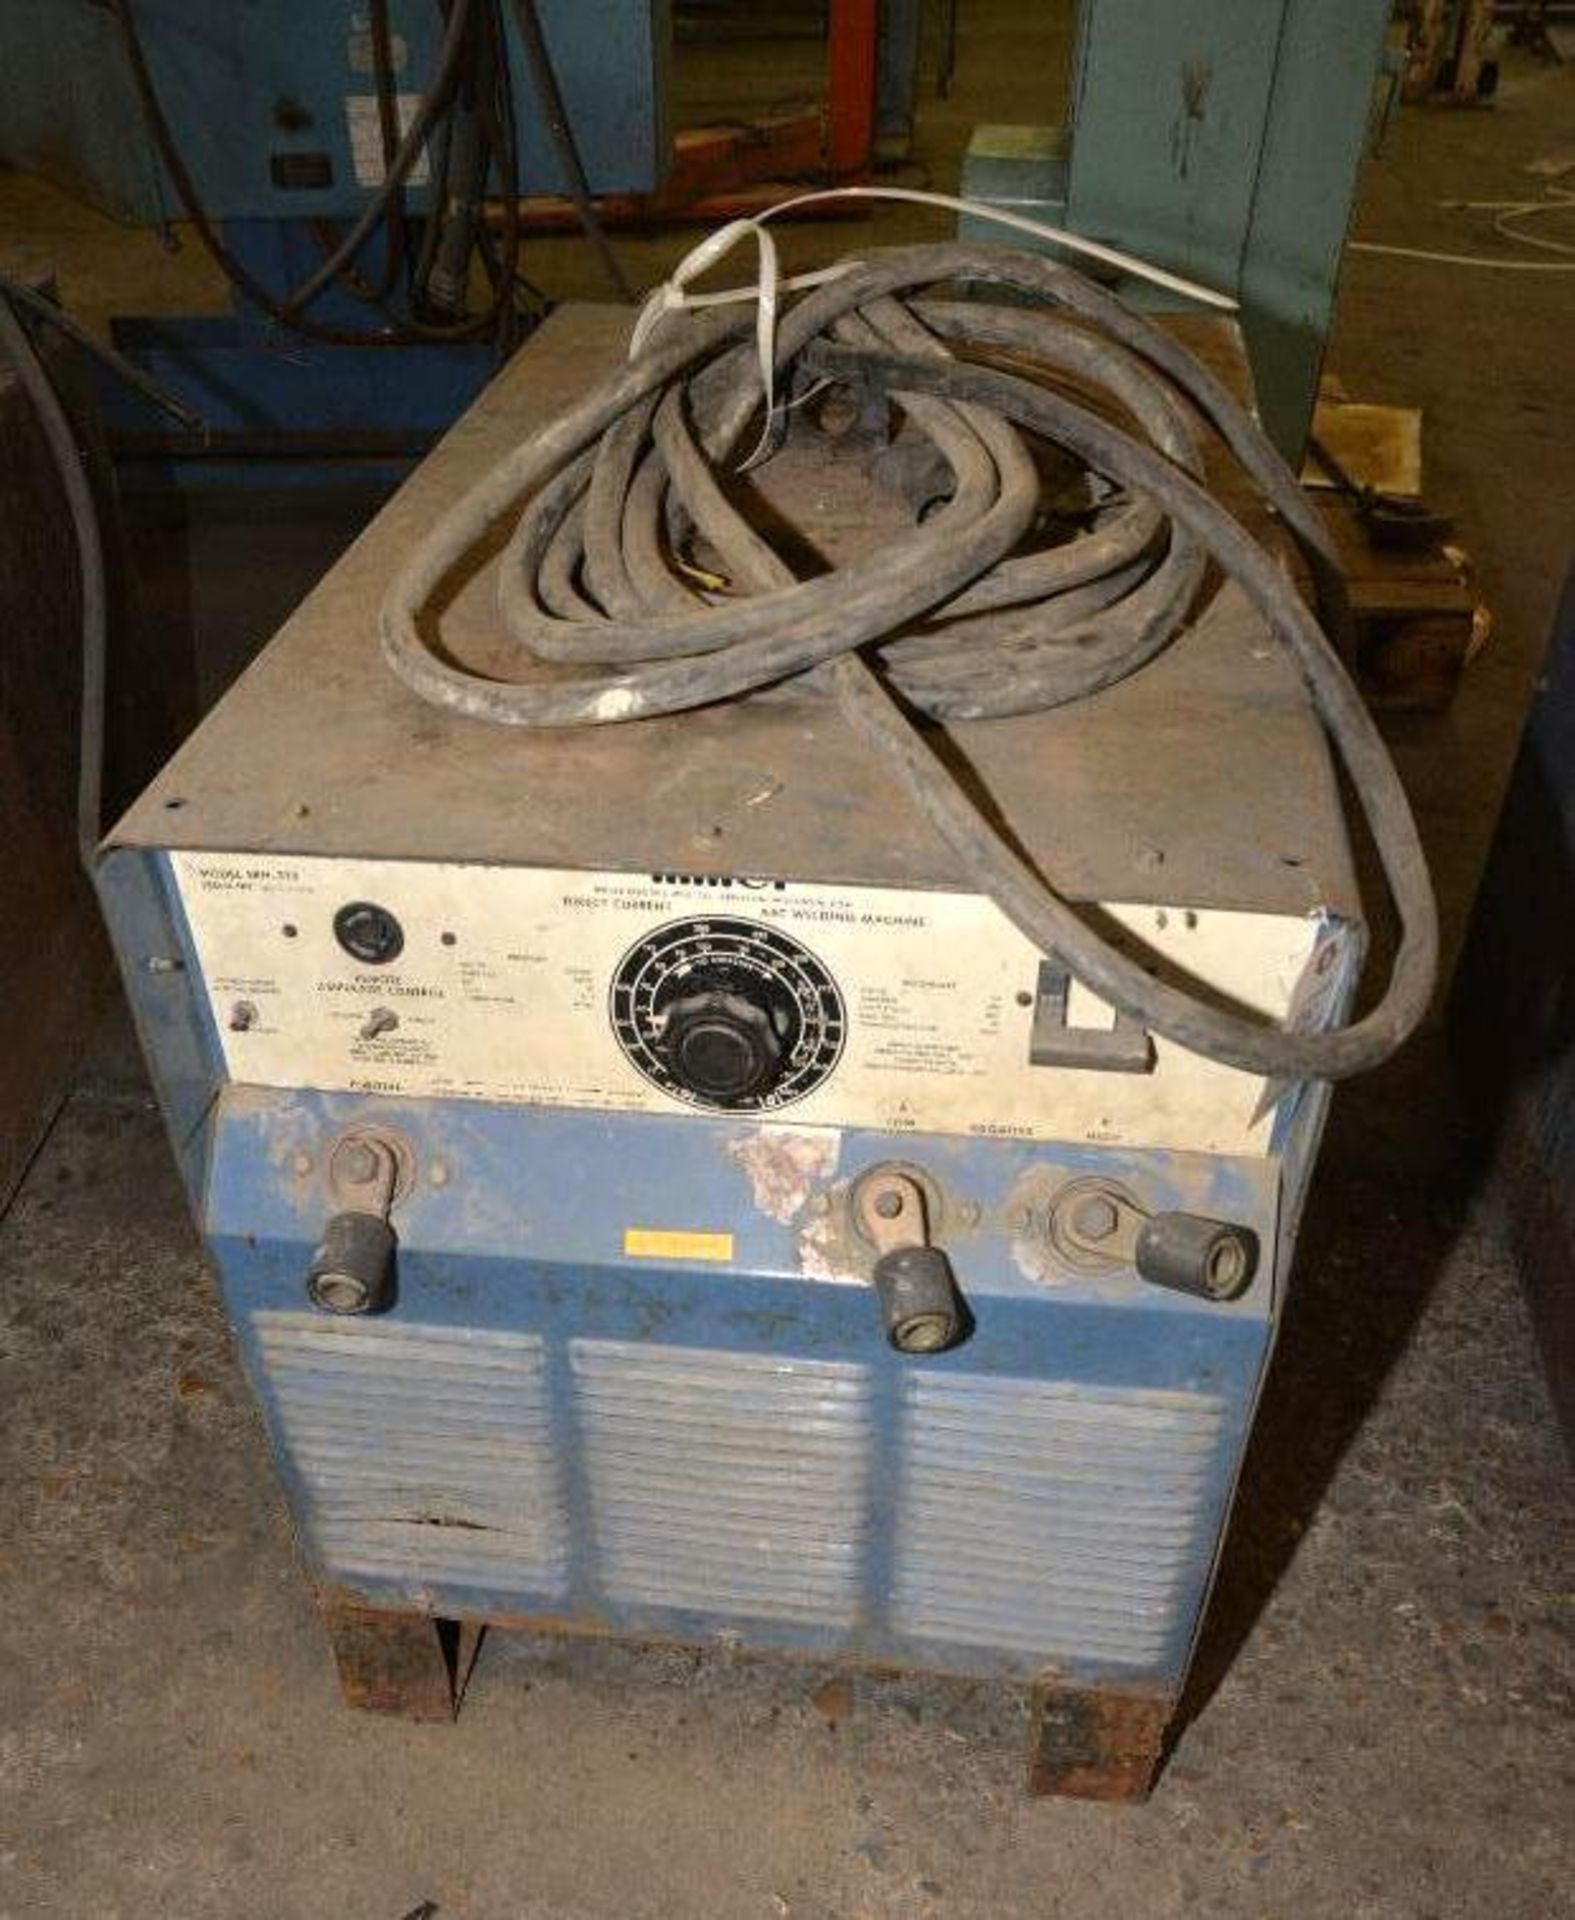 MILLER ARC WELDING MACHINE DIRECT CURRENTMODEL SRH333SERIAL NUMBER HD703356ROLL OF ELECTRICAL CORD